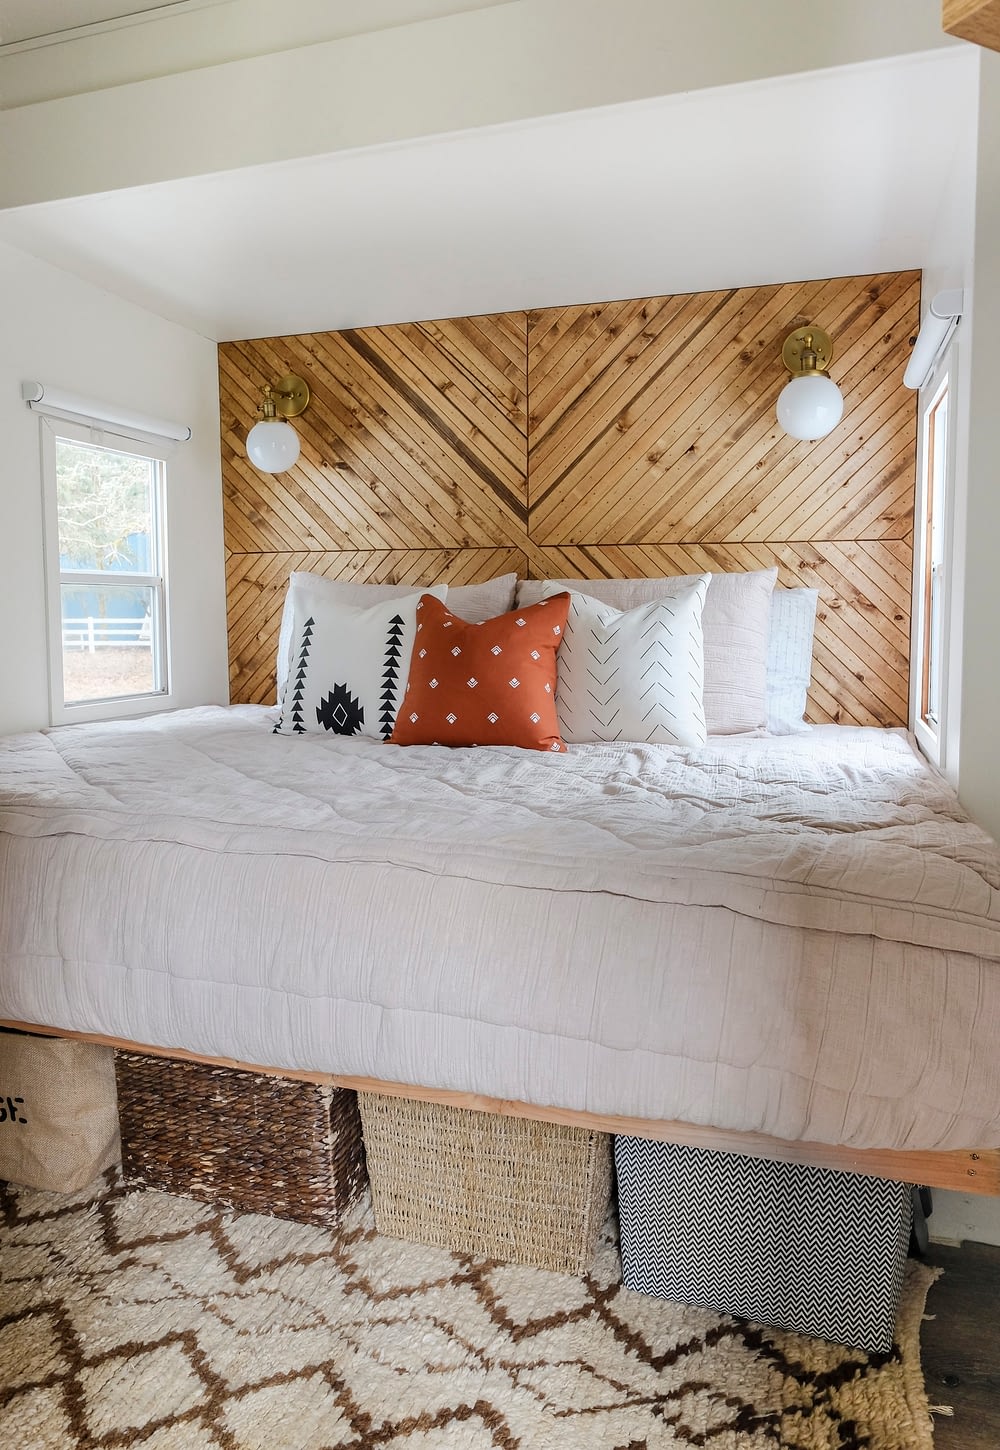 RV bedroom remodel with underbed storage and a geometric wood plank accent wall